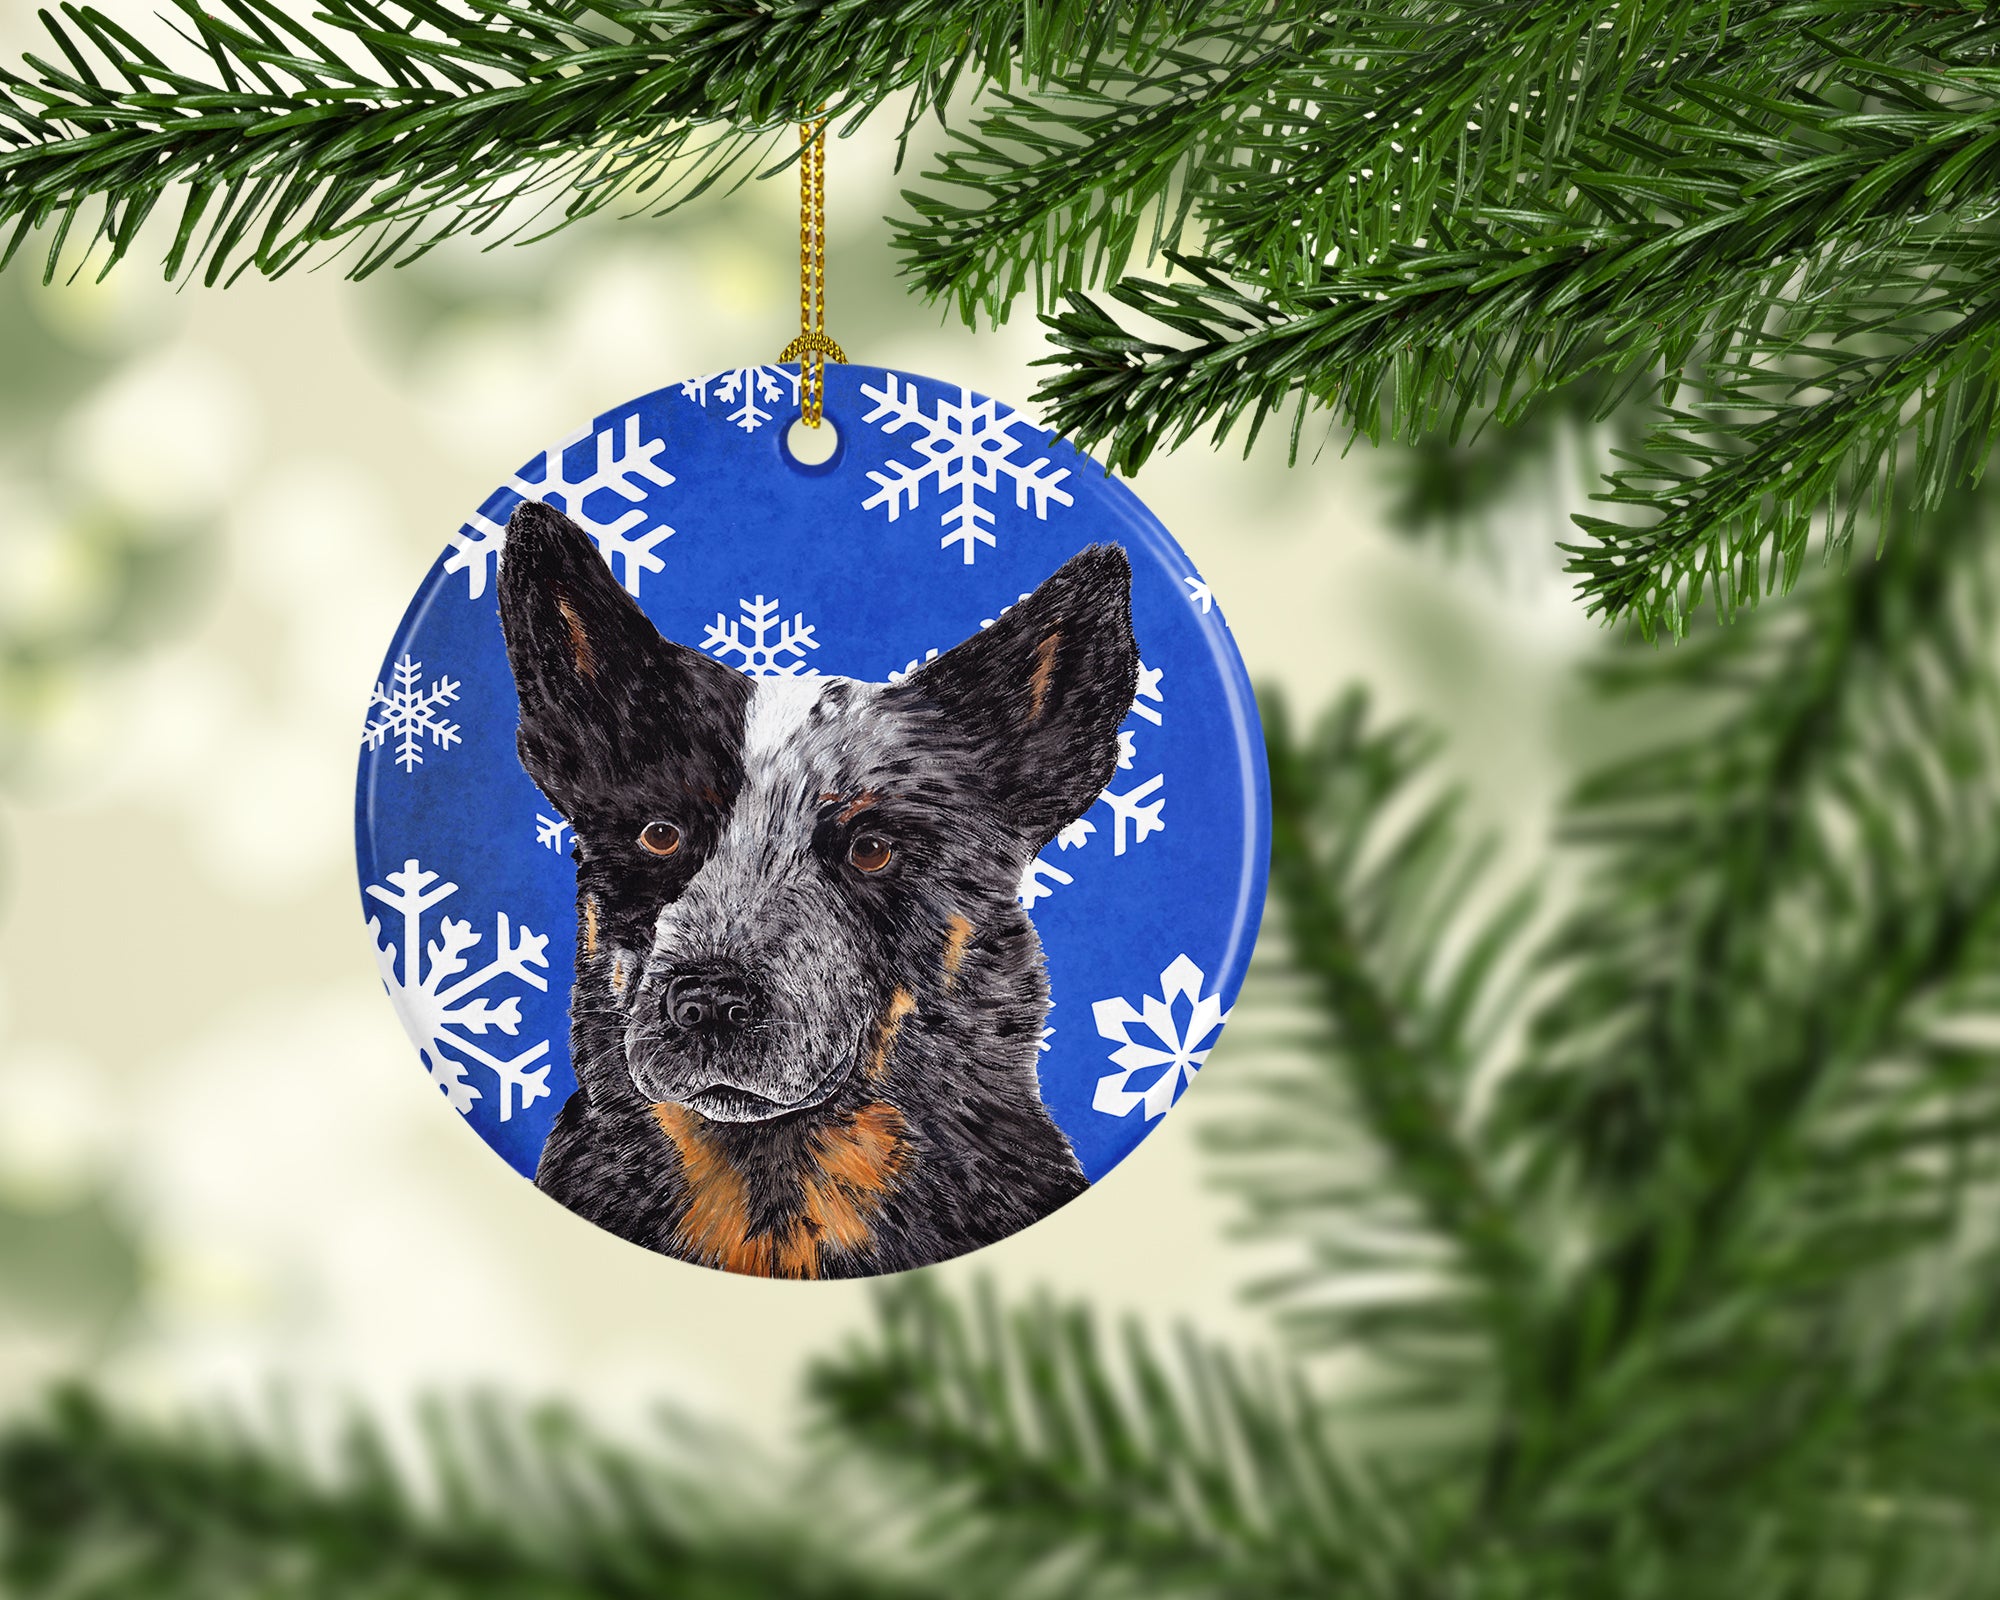 Australian Cattle Dog Winter Snowflakes Holiday Ceramic Ornament SC9396 - the-store.com